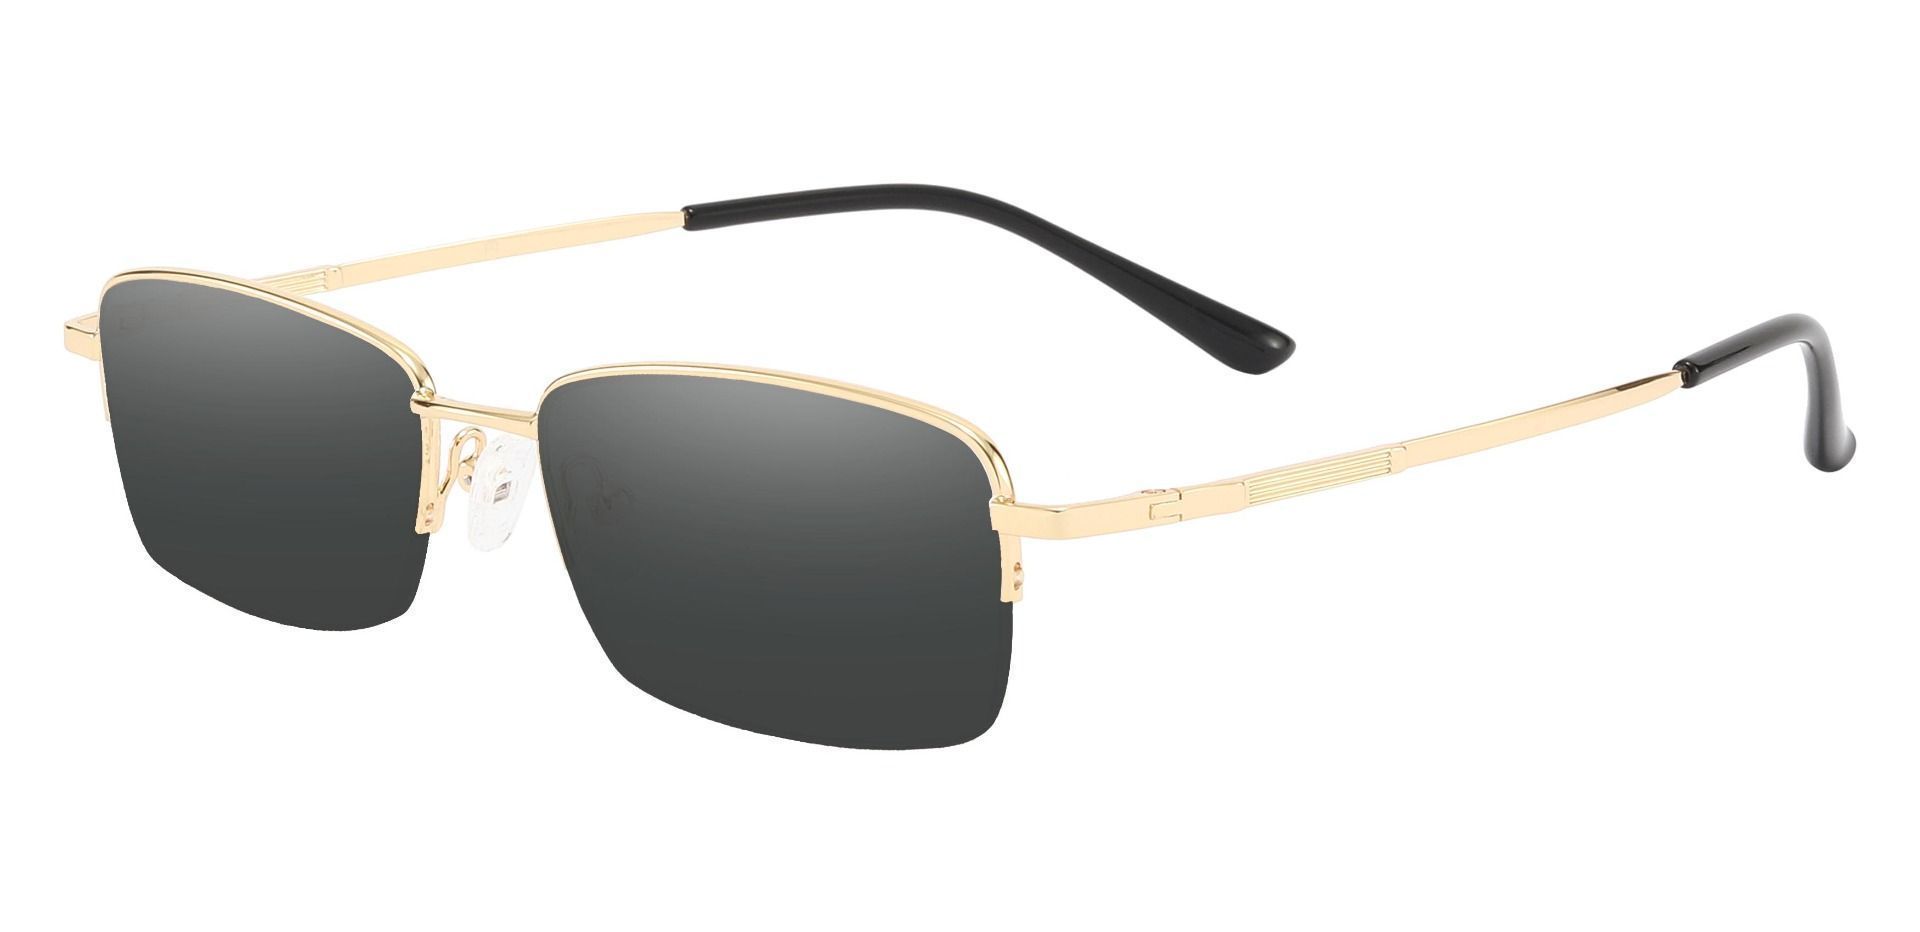 Milford Rectangle Lined Bifocal Sunglasses - Gold Frame With Gray Lenses